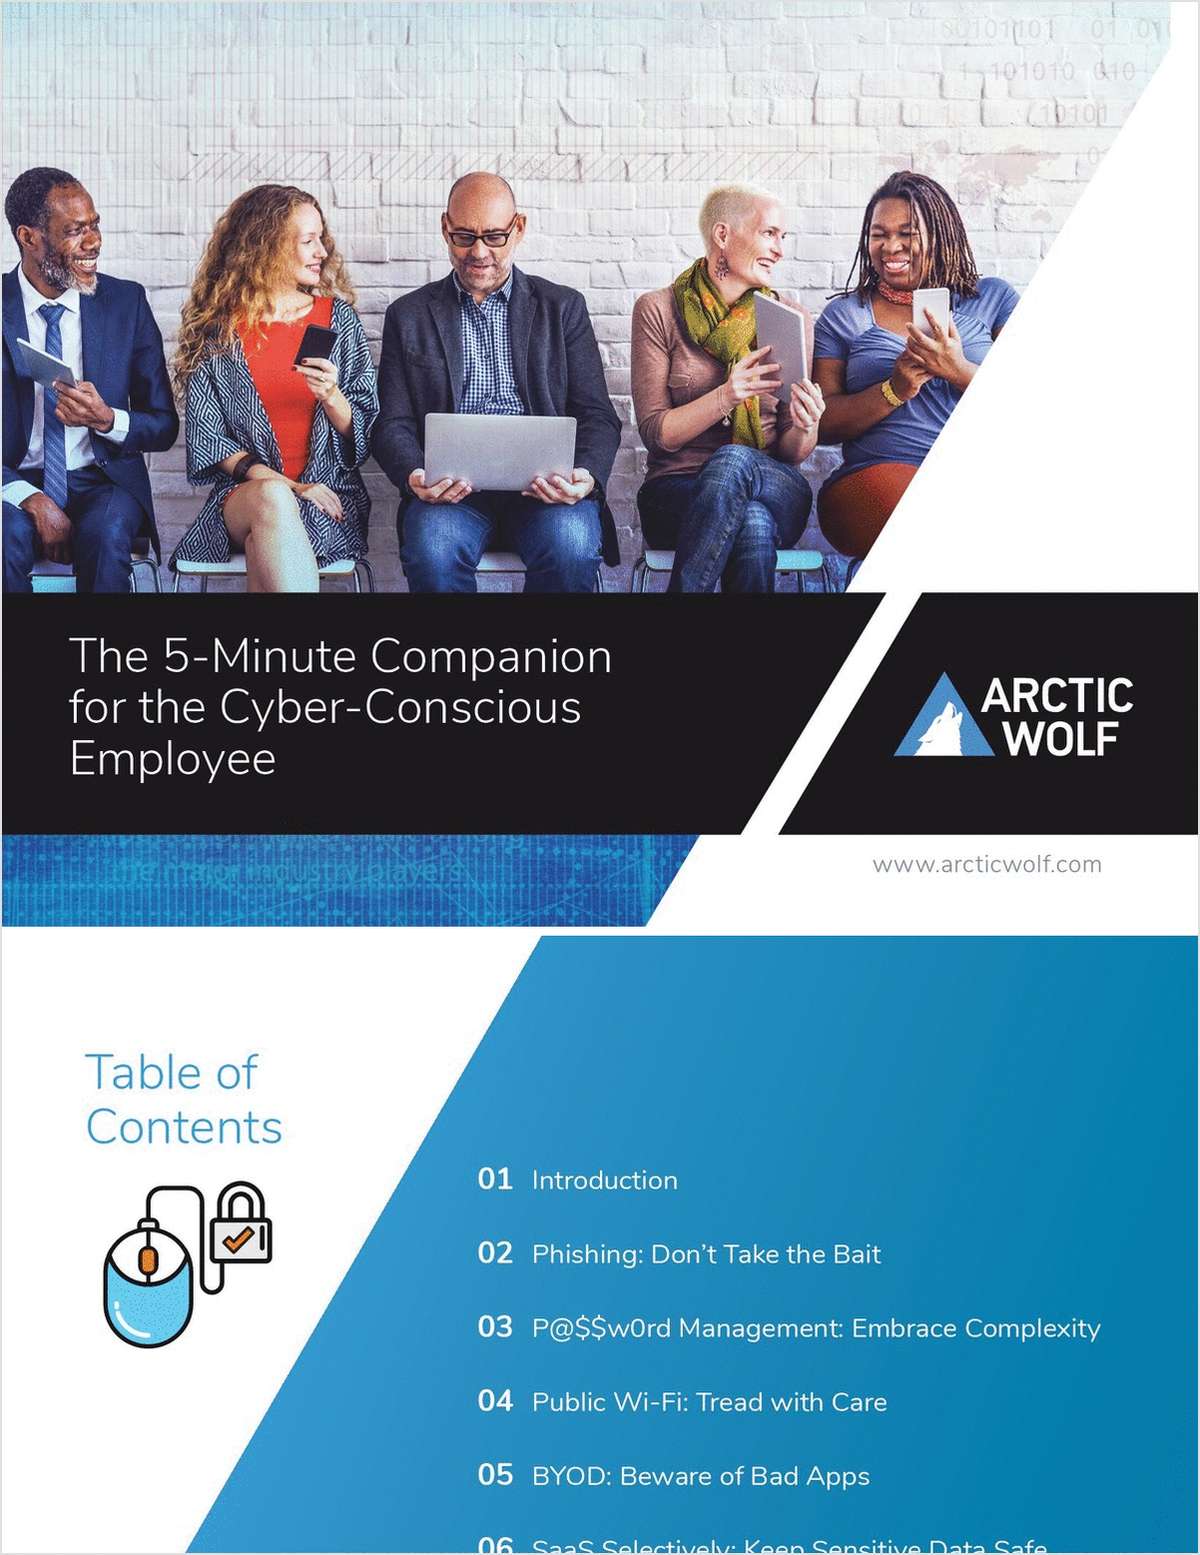 The 5-Minute Companion for the Cyber-Conscious Employee